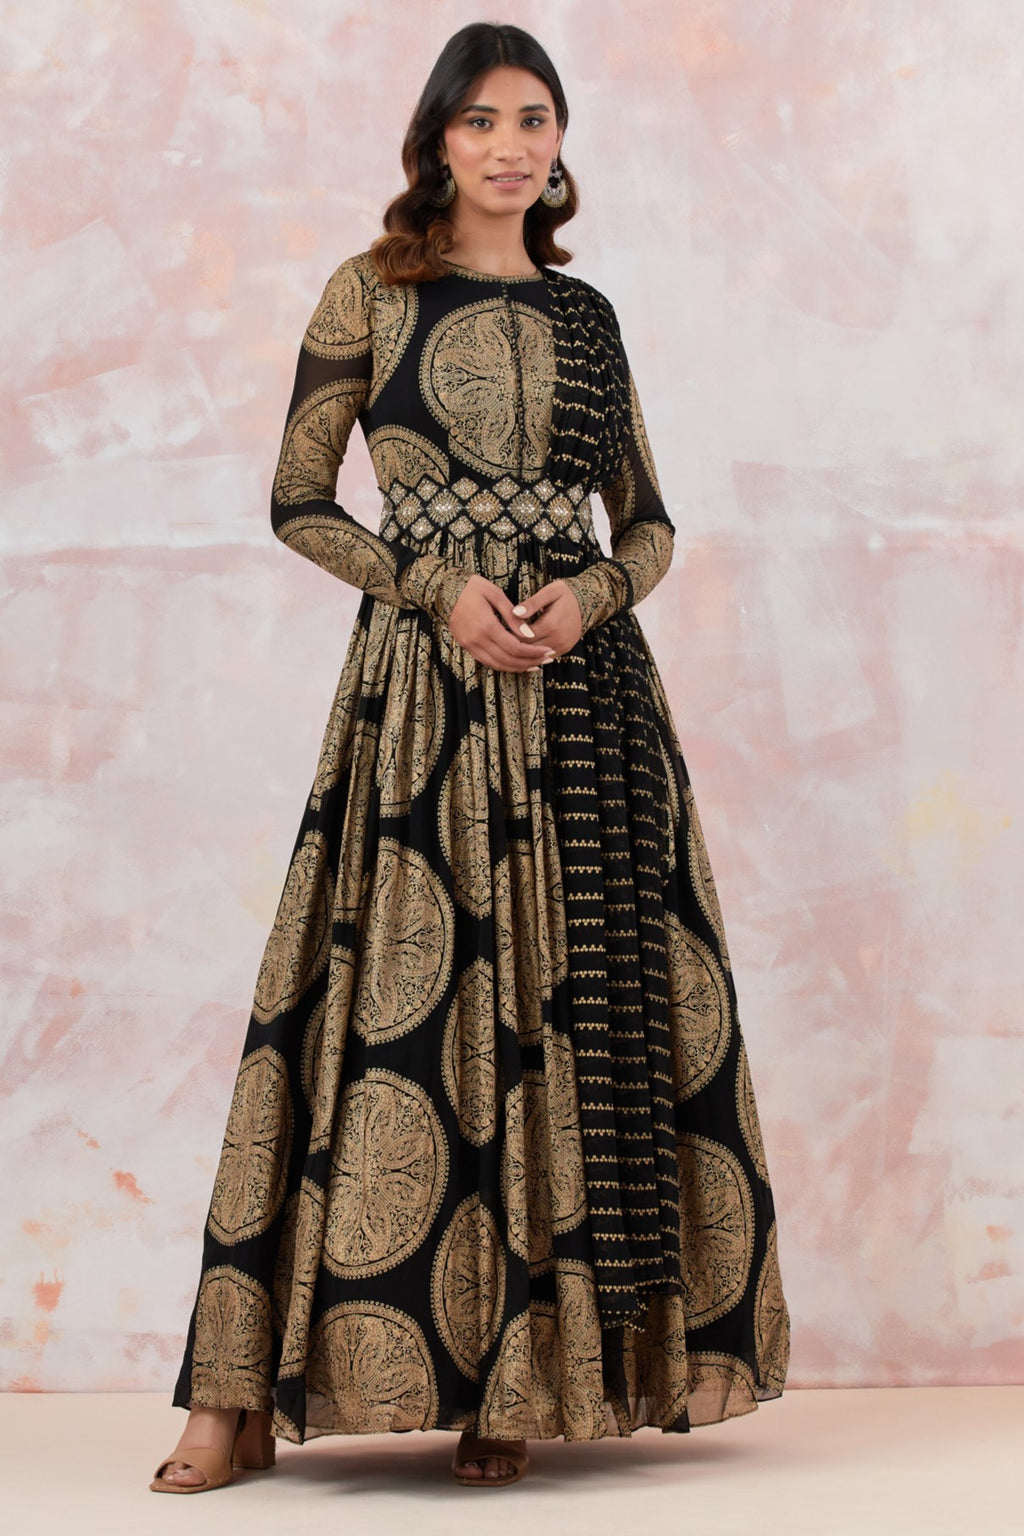 Buy Black stylish georgette Anarkali set featuring an all-over foil print, that comes with a pearl embroidery belt. Dazzle on weddings and special occasions with exquisite Indian designer dresses, sharara suits, Anarkali suits, and wedding lehengas from Pure Elegance Indian fashion store in the USA.